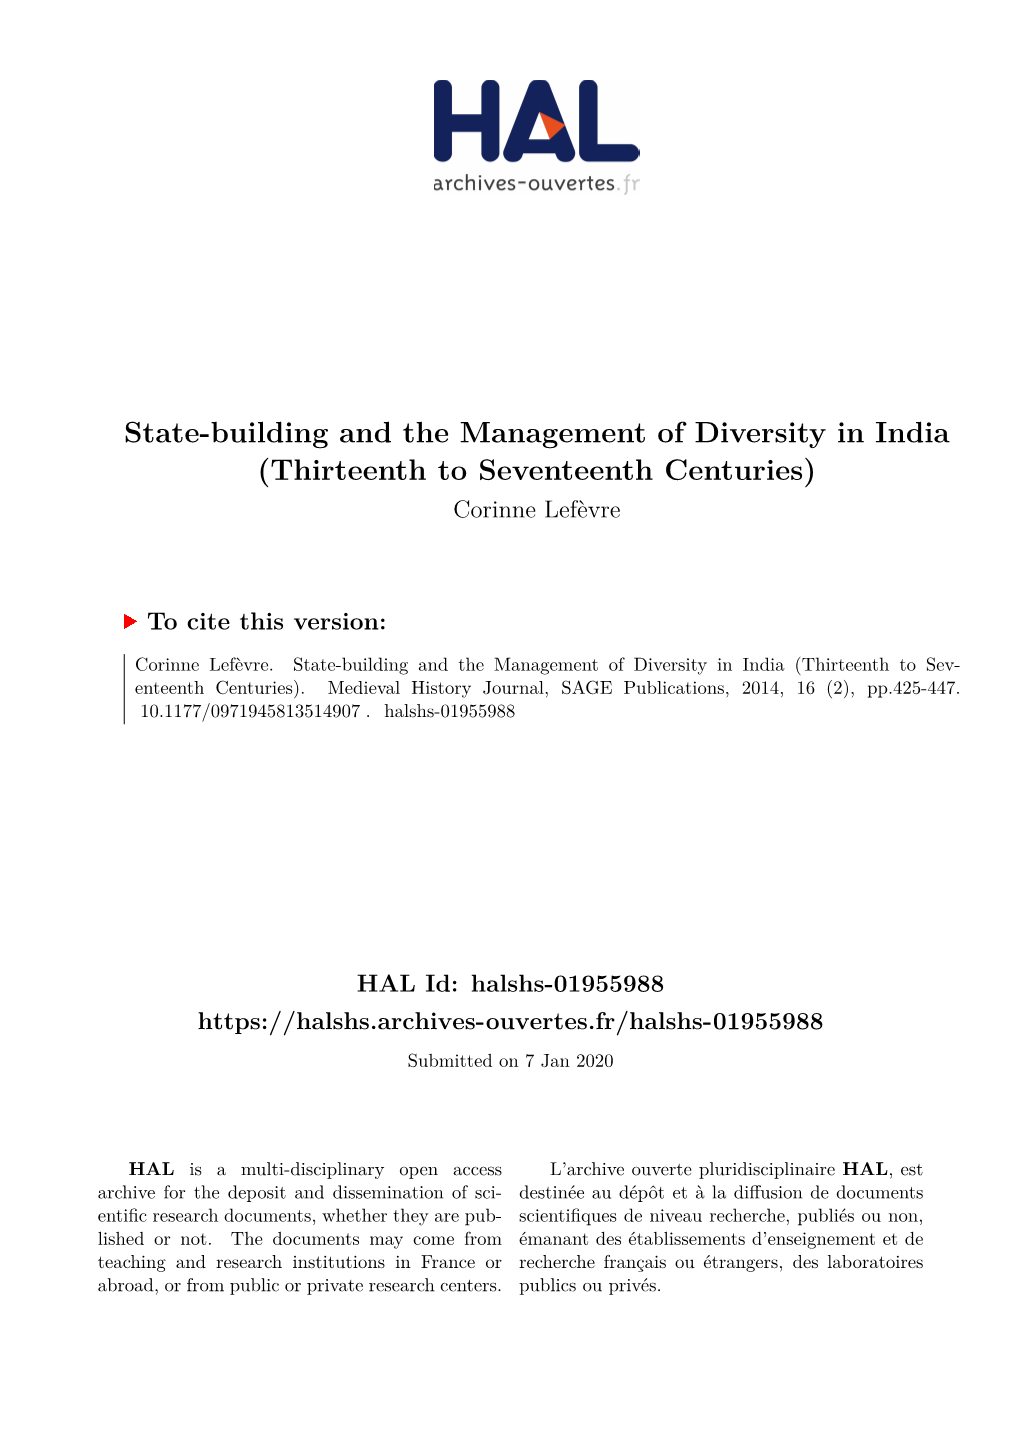 State-Building and the Management of Diversity in India (Thirteenth to Seventeenth Centuries) Corinne Lefèvre